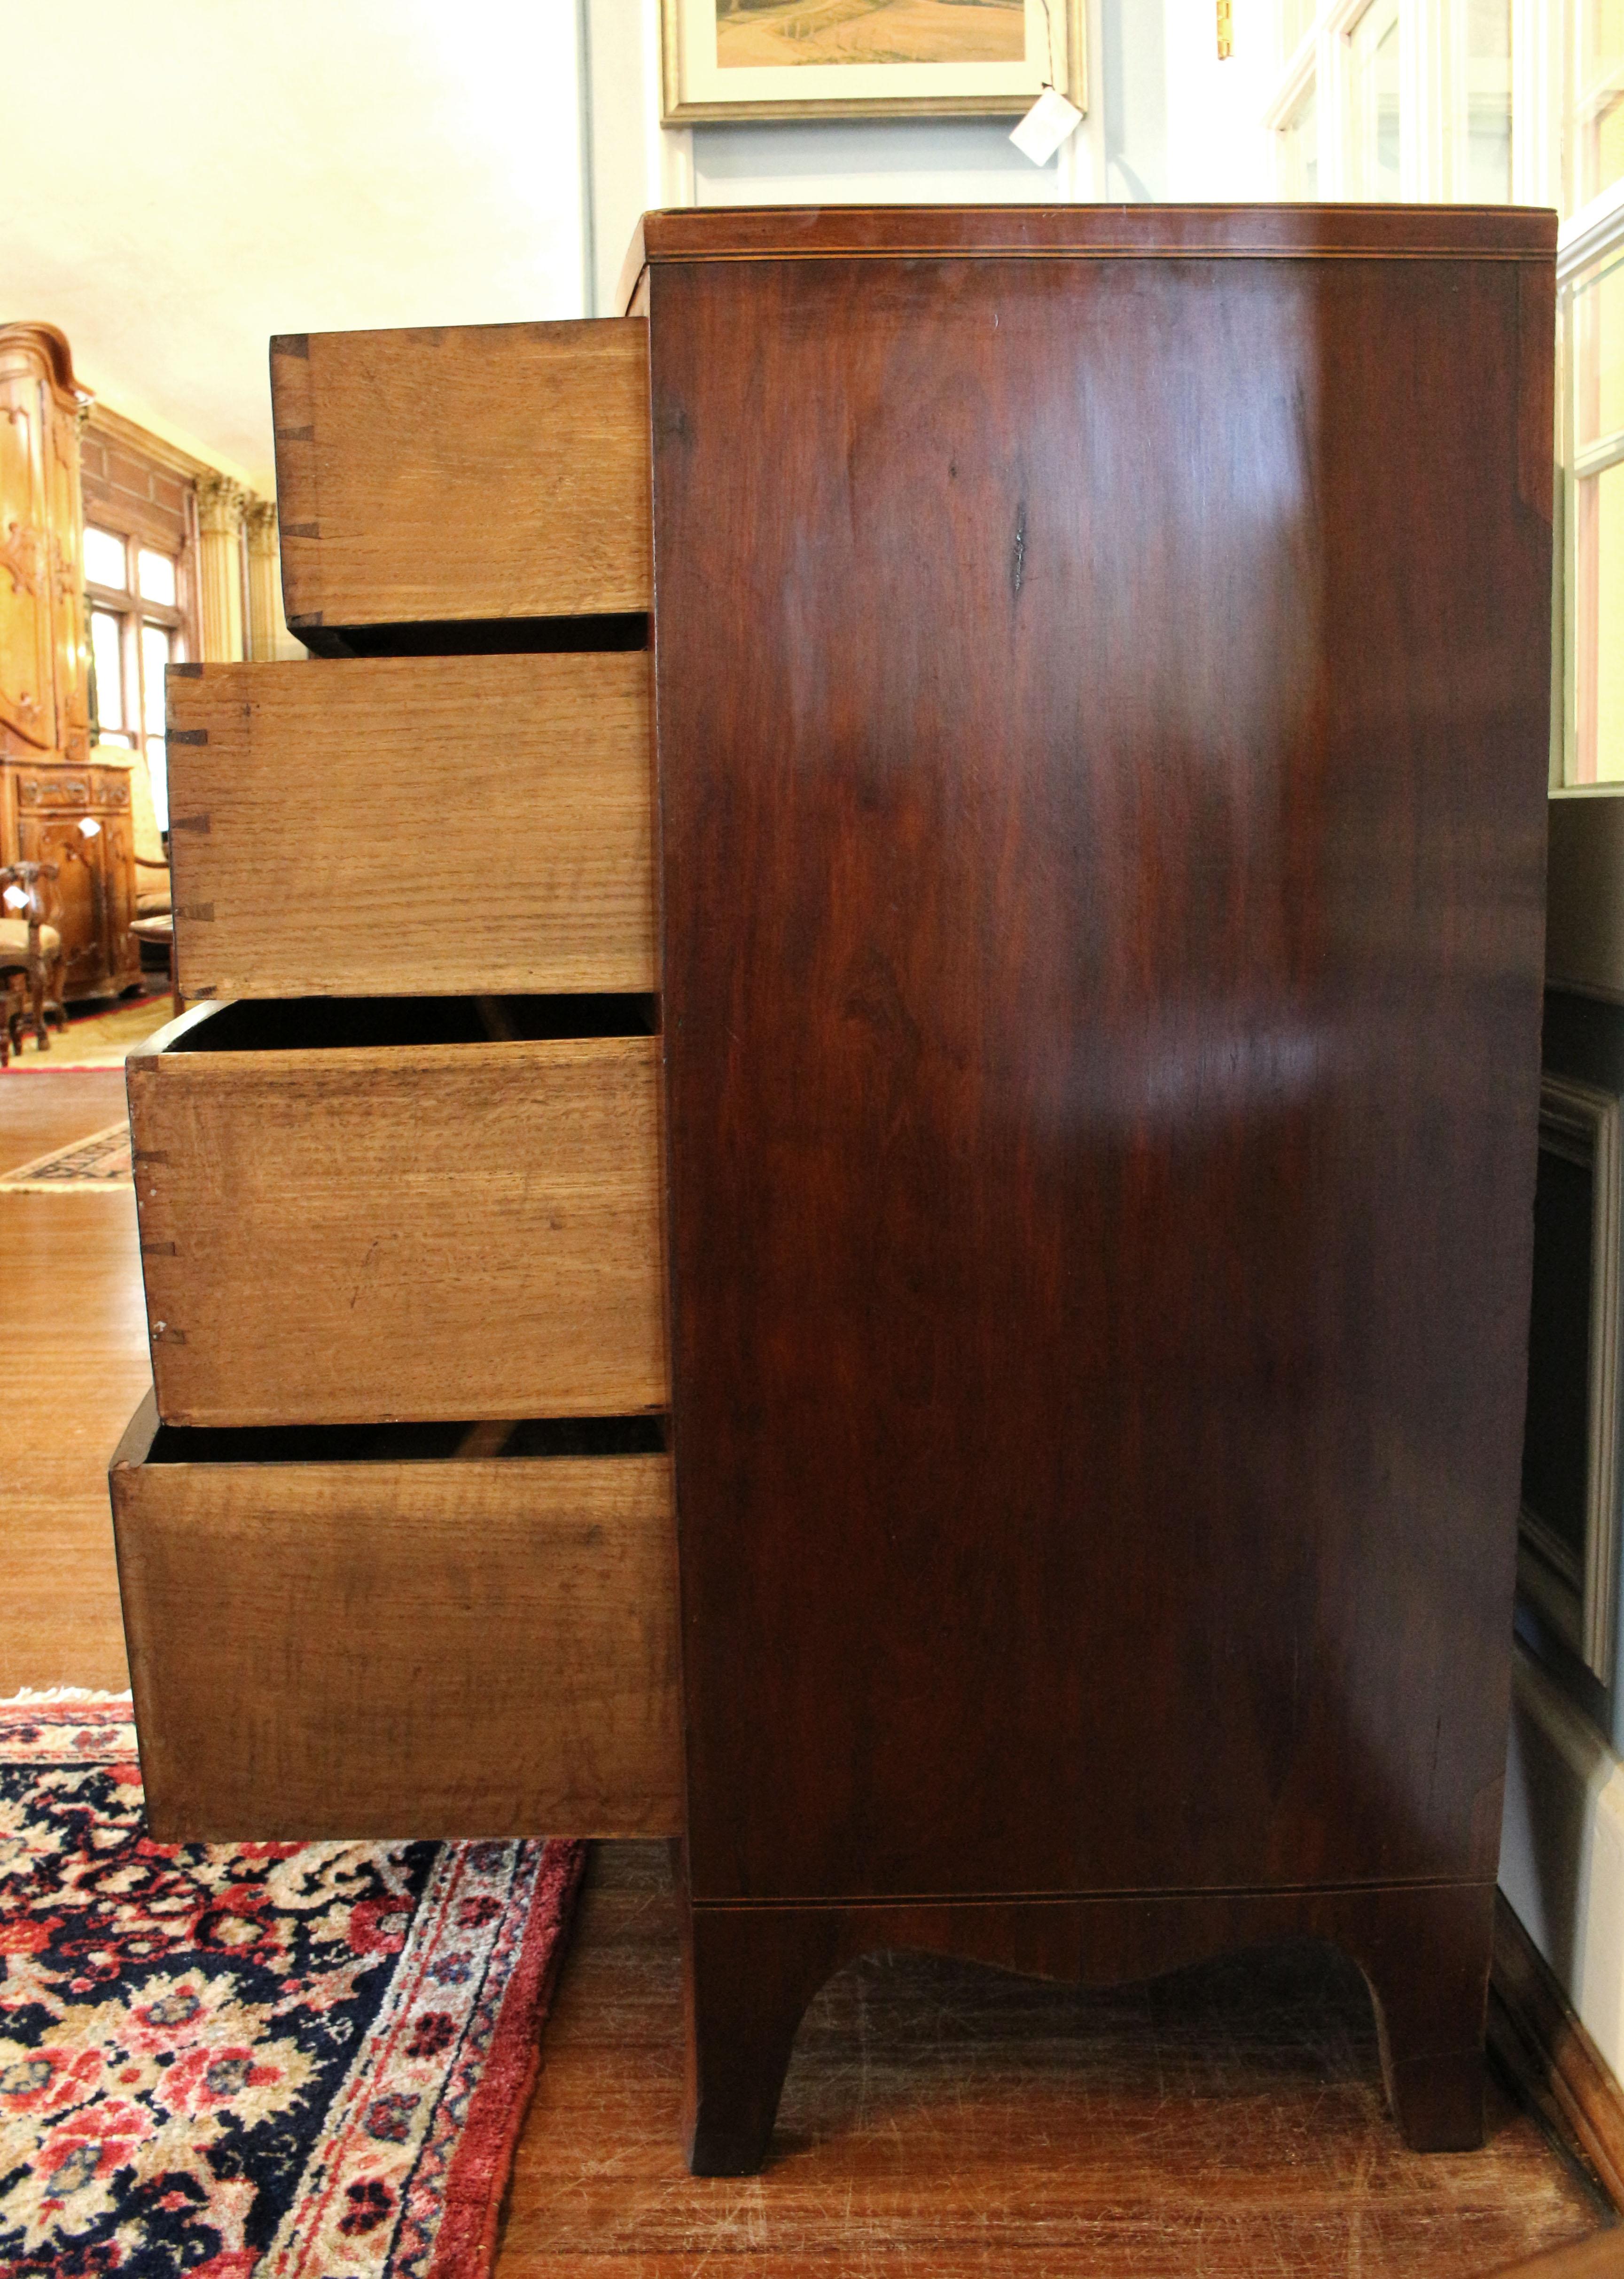 Early 19th century bowfront chest of drawers, English, Regency period. 2 over 3 drawer form raised on French splay bracket feet, shaped apron. Extensive line inlays of contrasting ebony & boxwood and boxwood edging to each drawer. Oak secondary